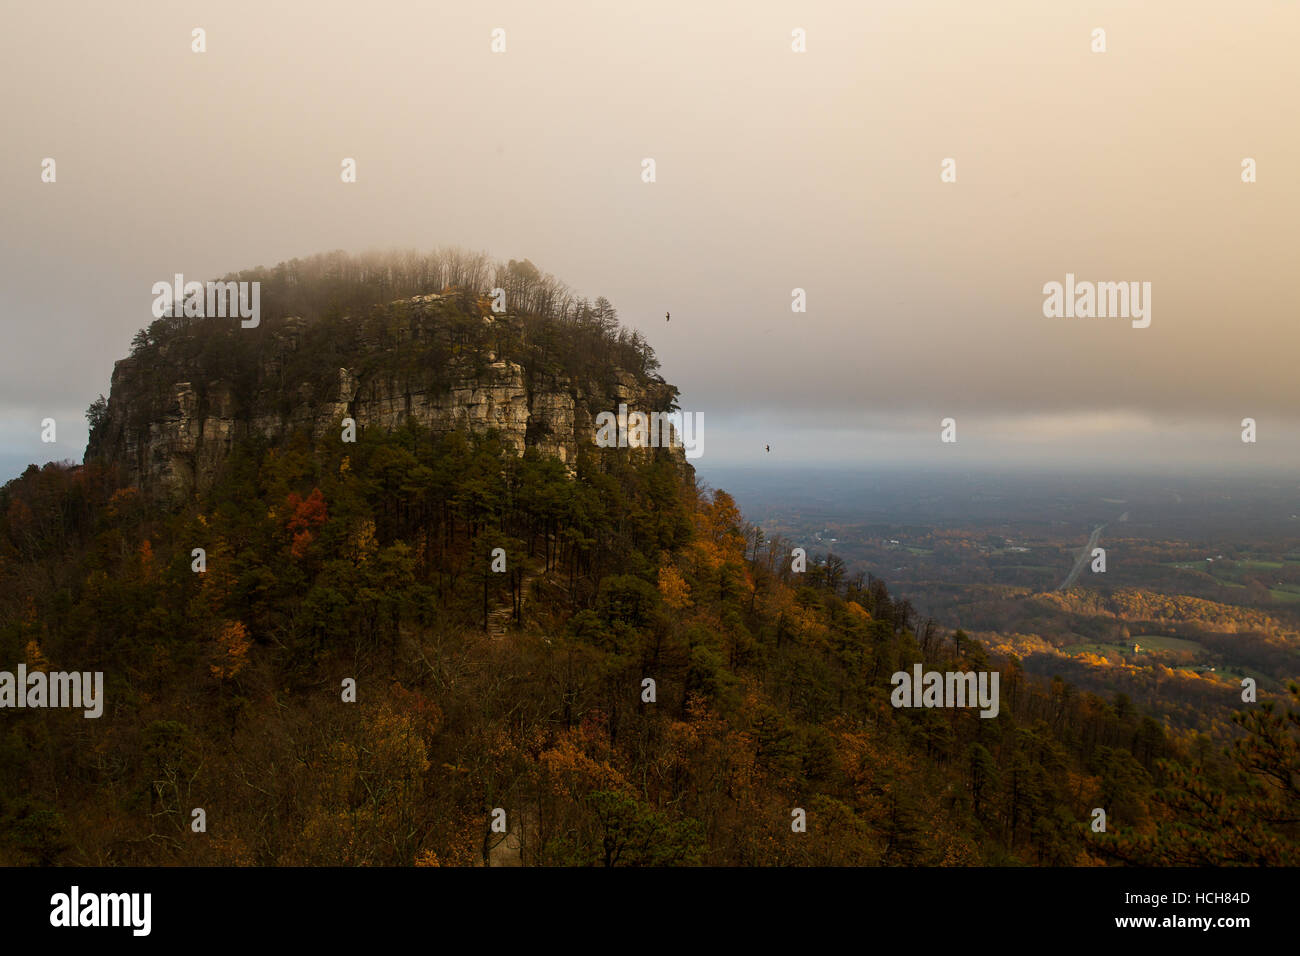 Big pinnacle of Pilot Knob in North Carolina, USA, showing autumn colored leaves and a low cloud cover with circling birds Stock Photo